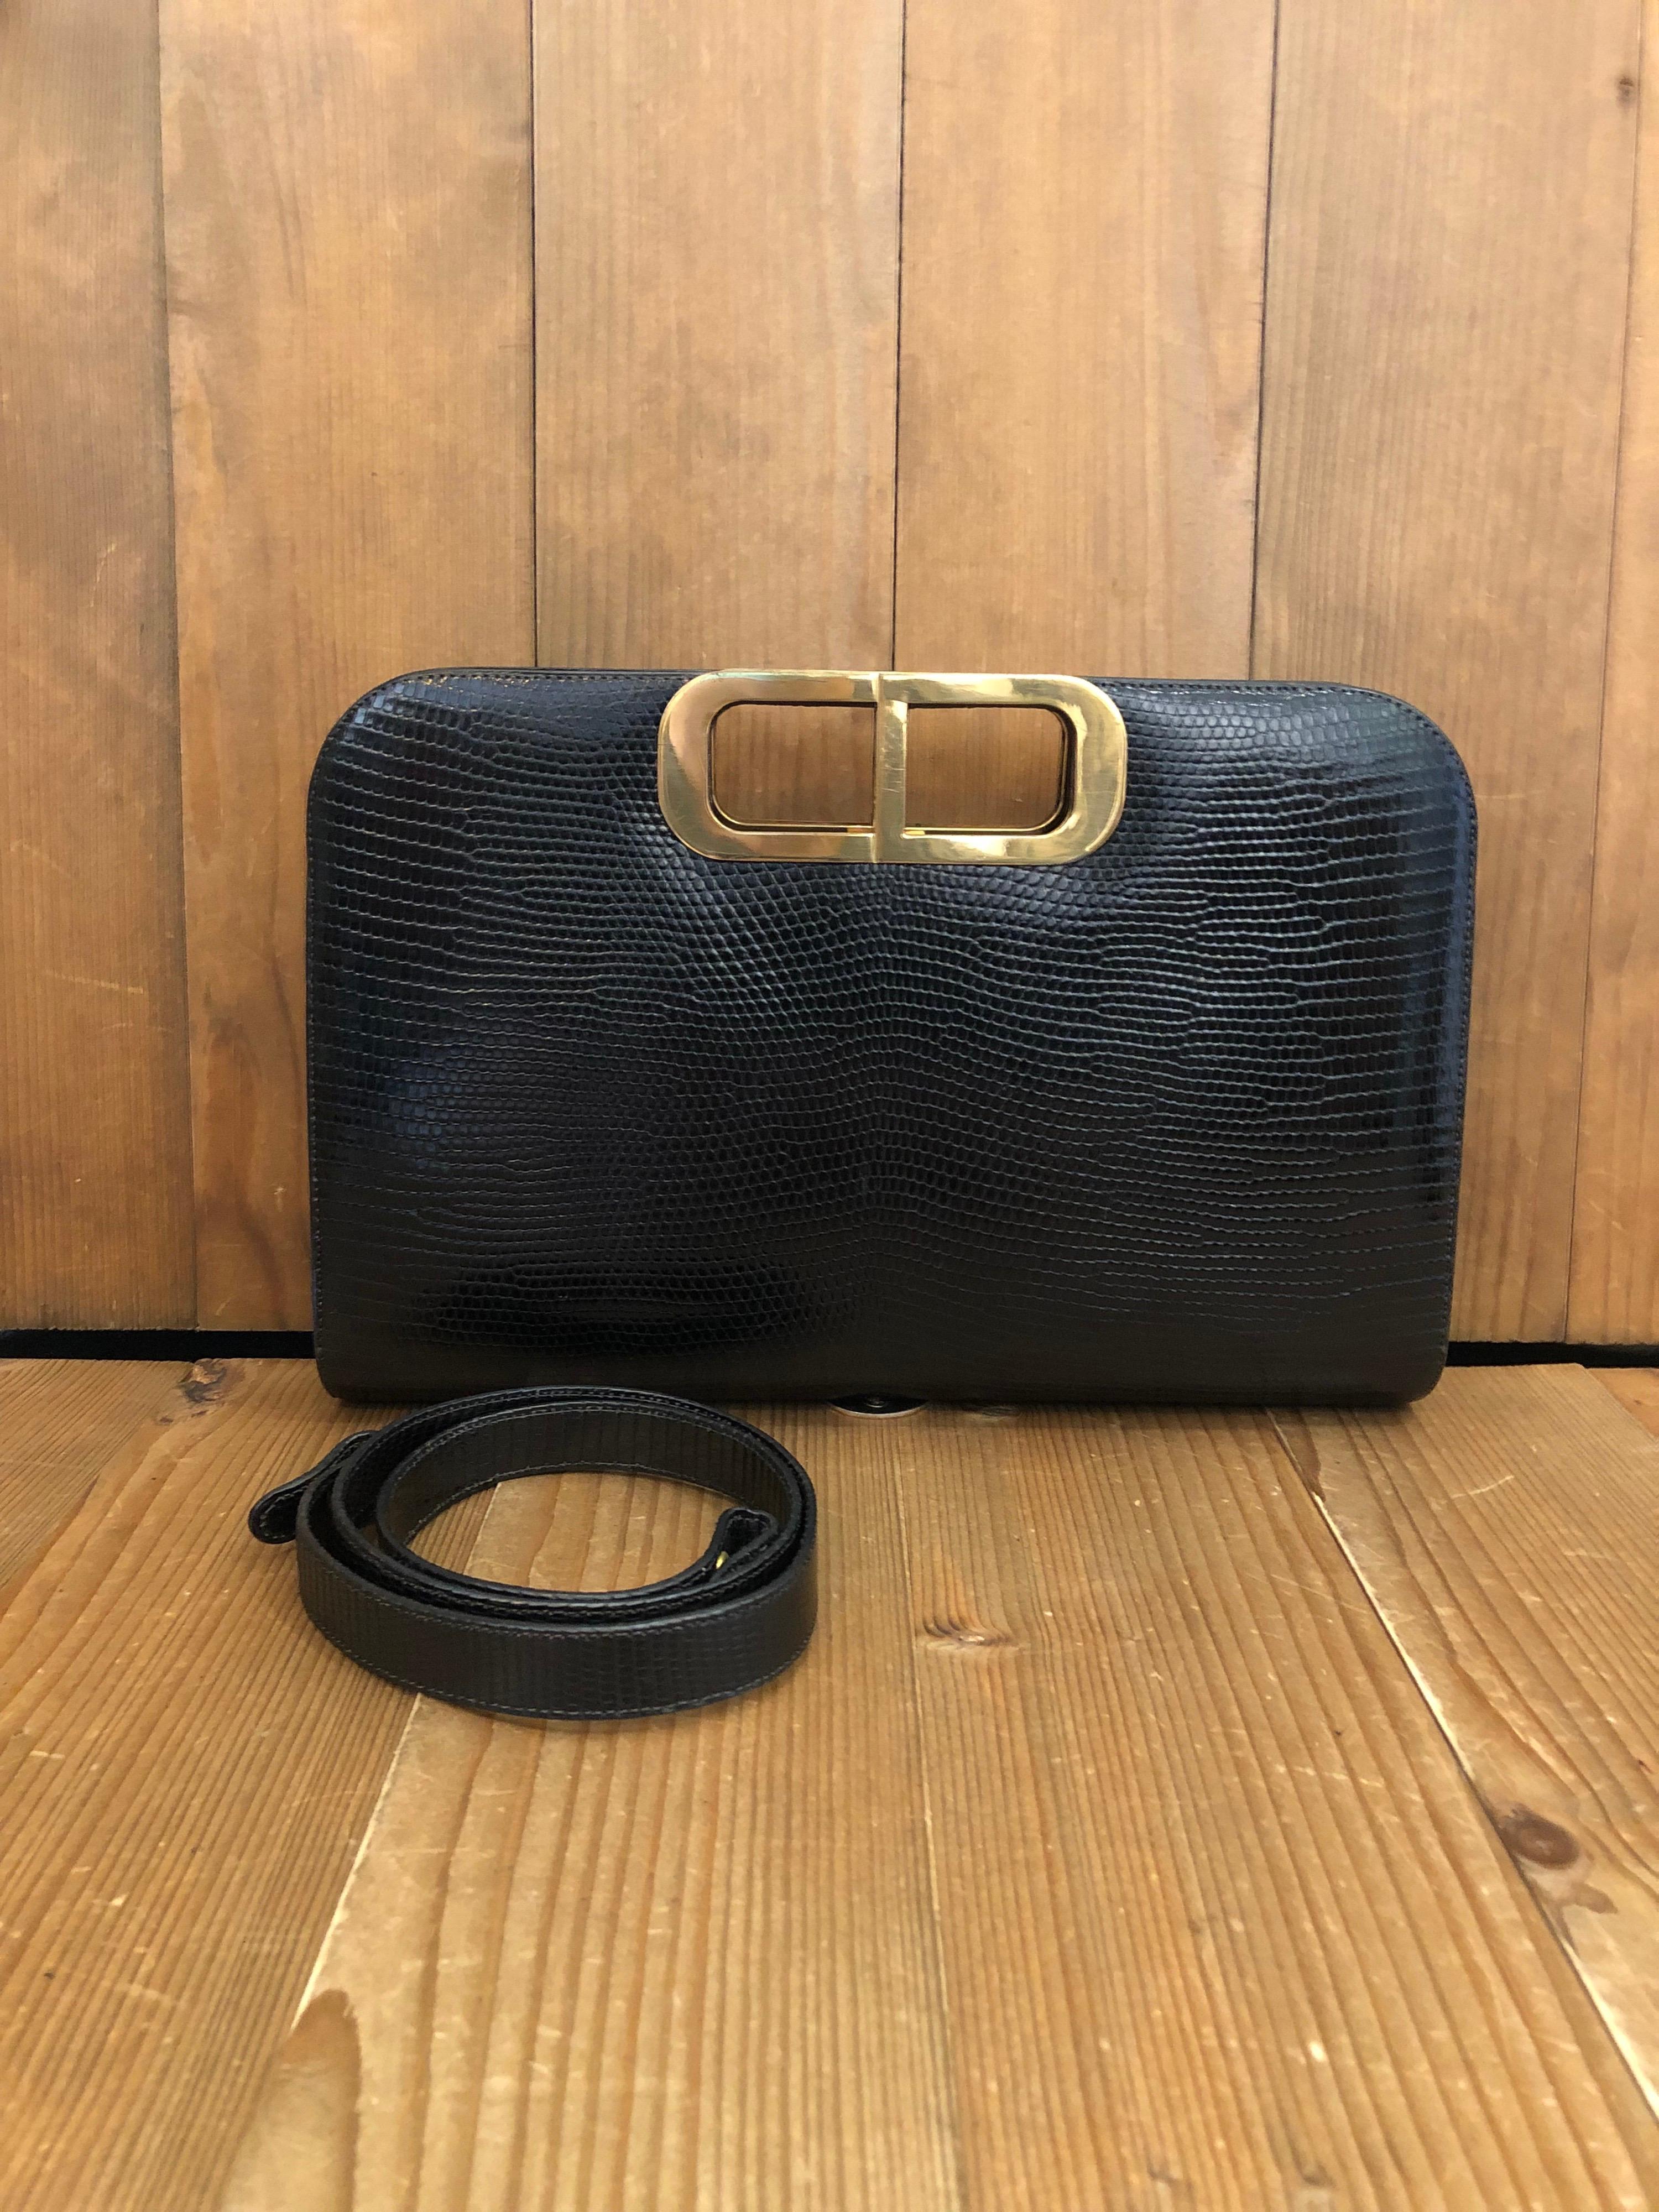 Vintage Christian Dior Two Way Clutch Shoulder Bag in black lizard skin featuring gold toned CD handles. Comes with detachable strap to carry it as a shoulder bag. Made in France. Measures 11 x 7 x 1.5 inches.

Condition: Some signs of use